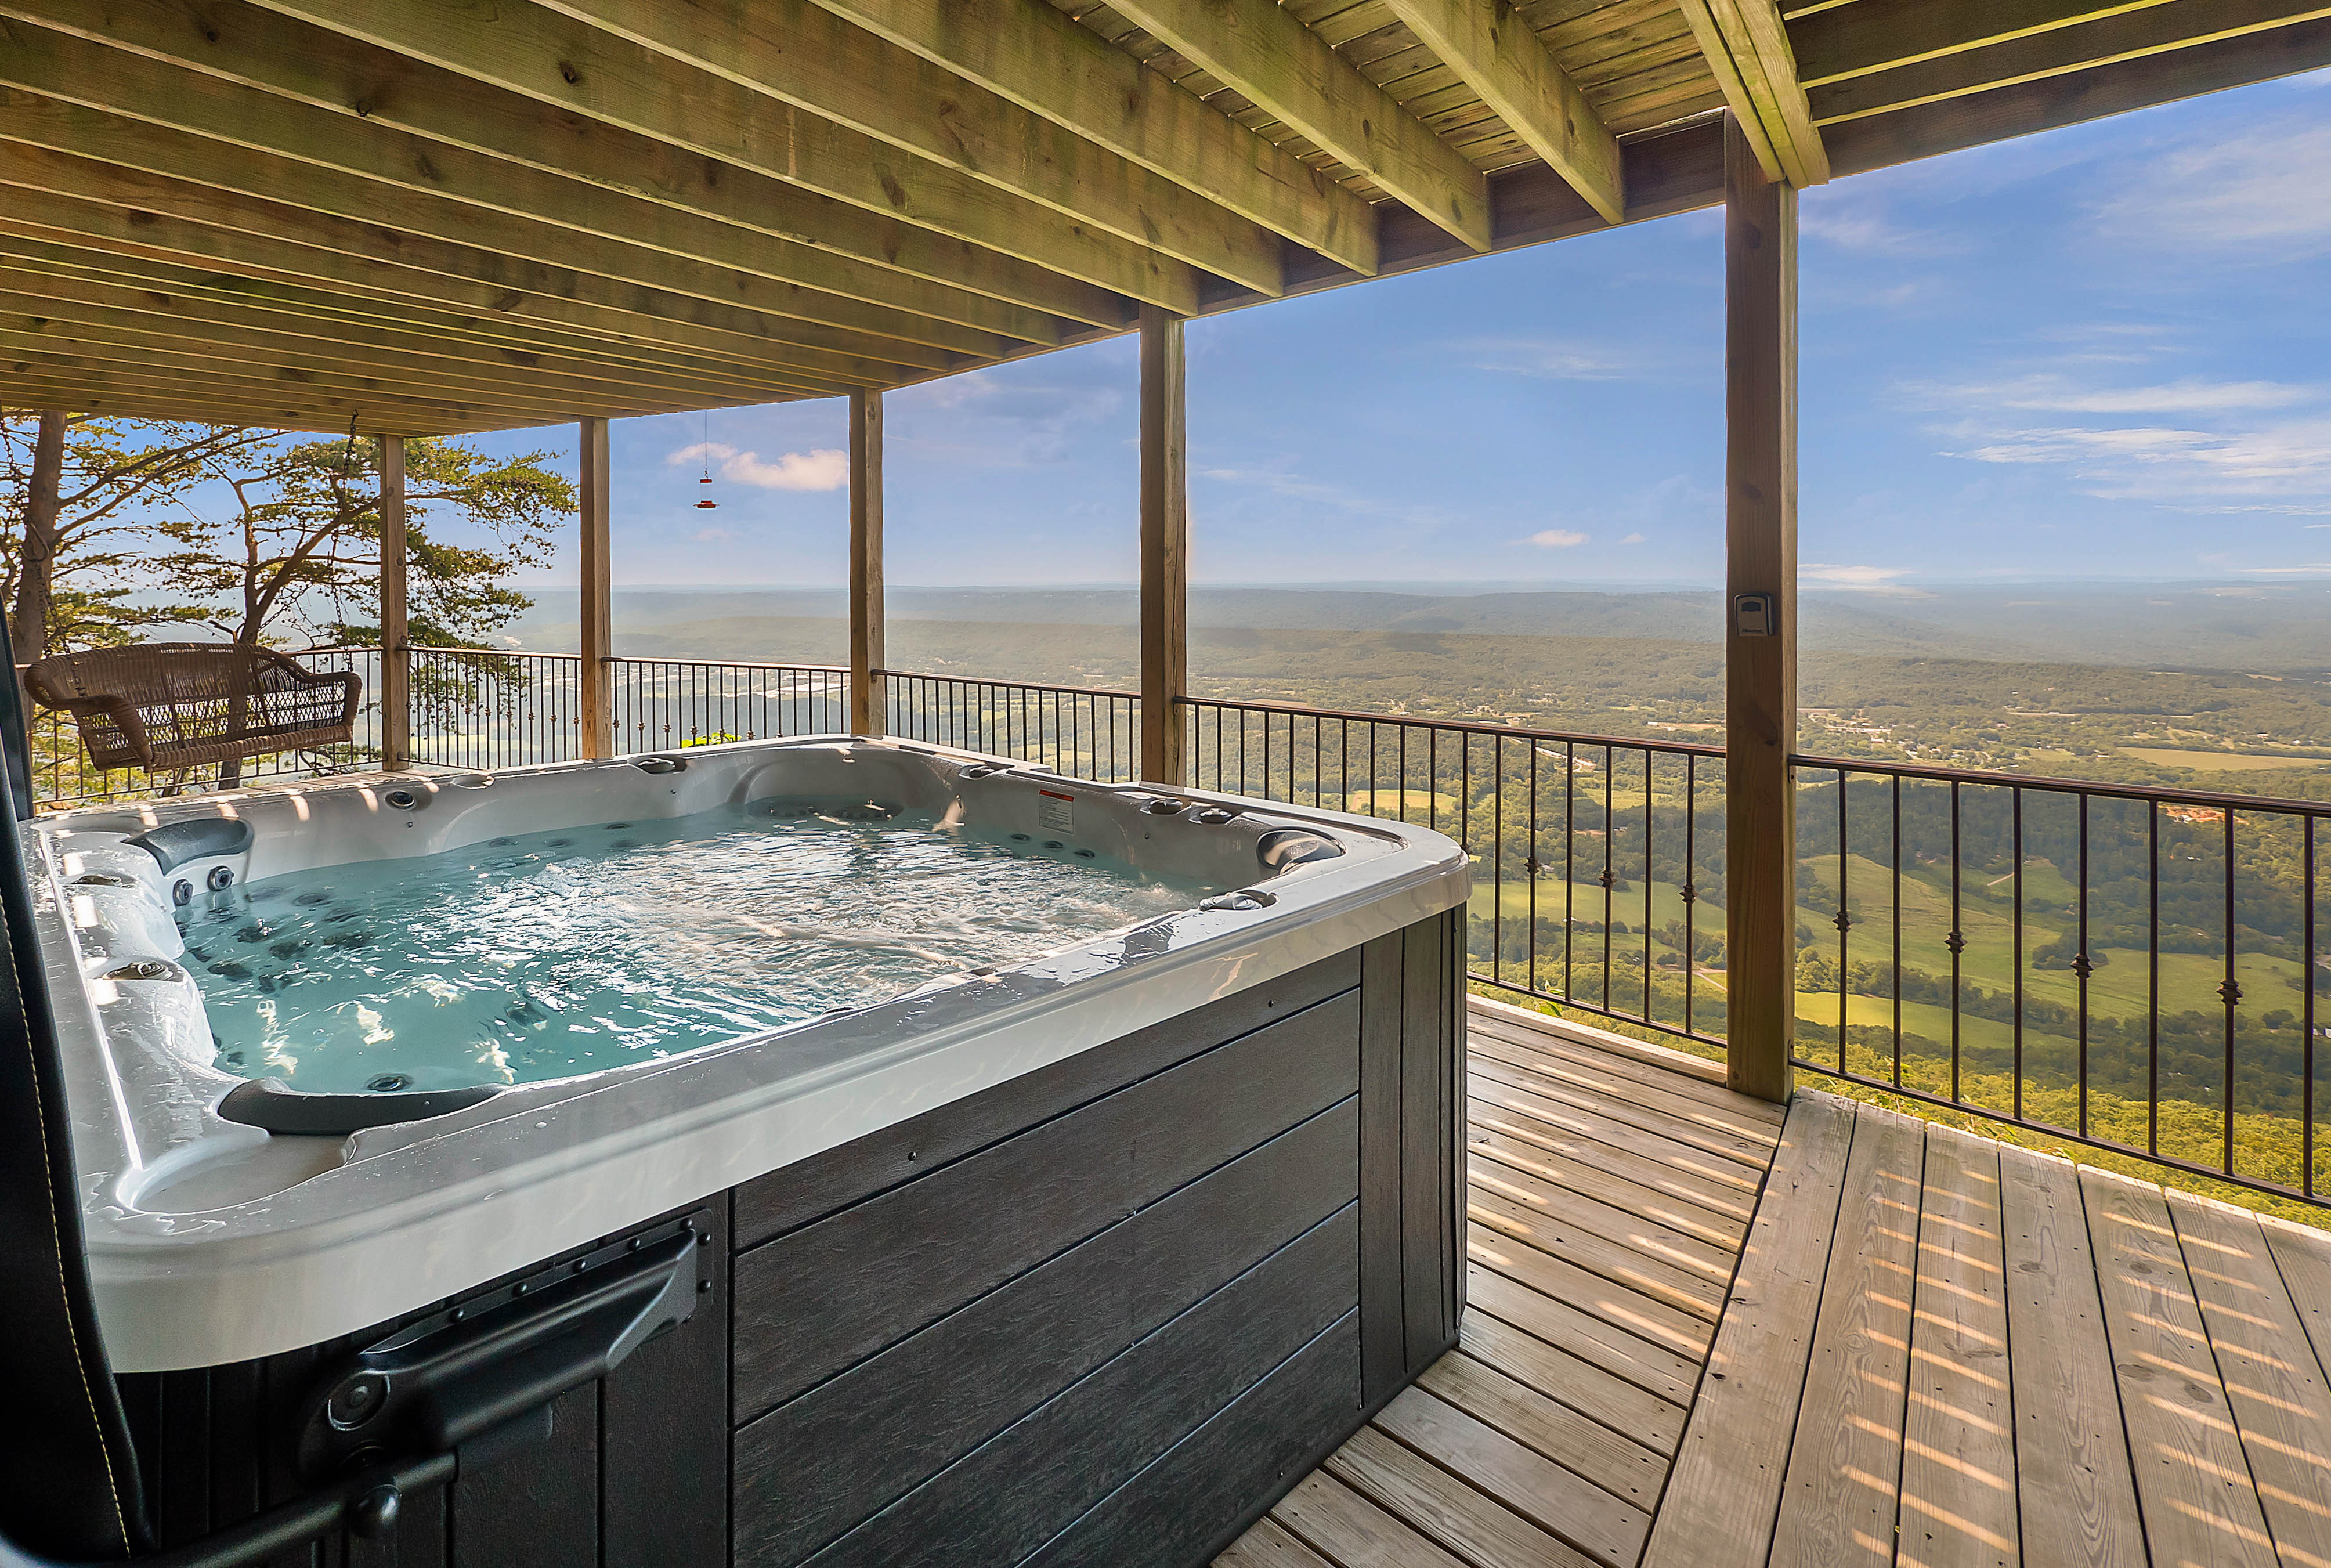 Hot tub on deck with a view